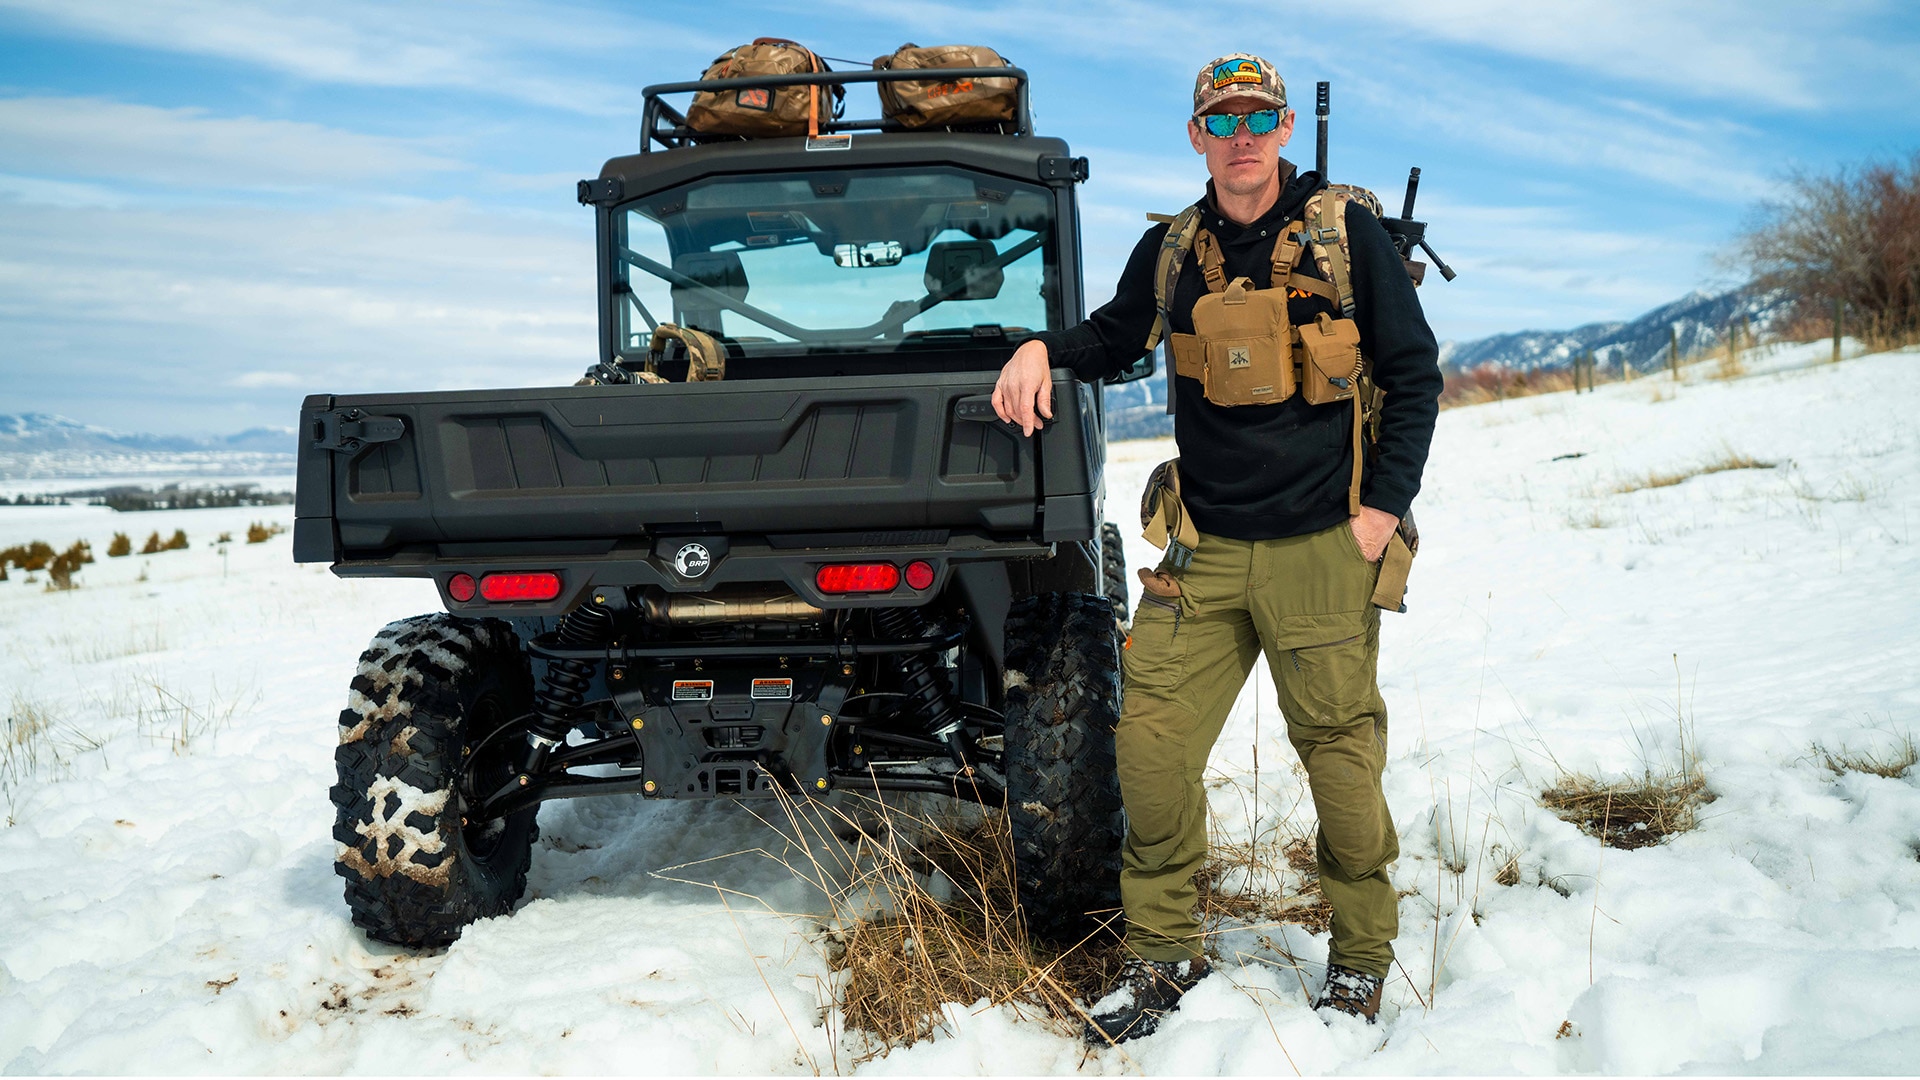 Hunter next to a Can-Am Defender Side-by-side vehicle